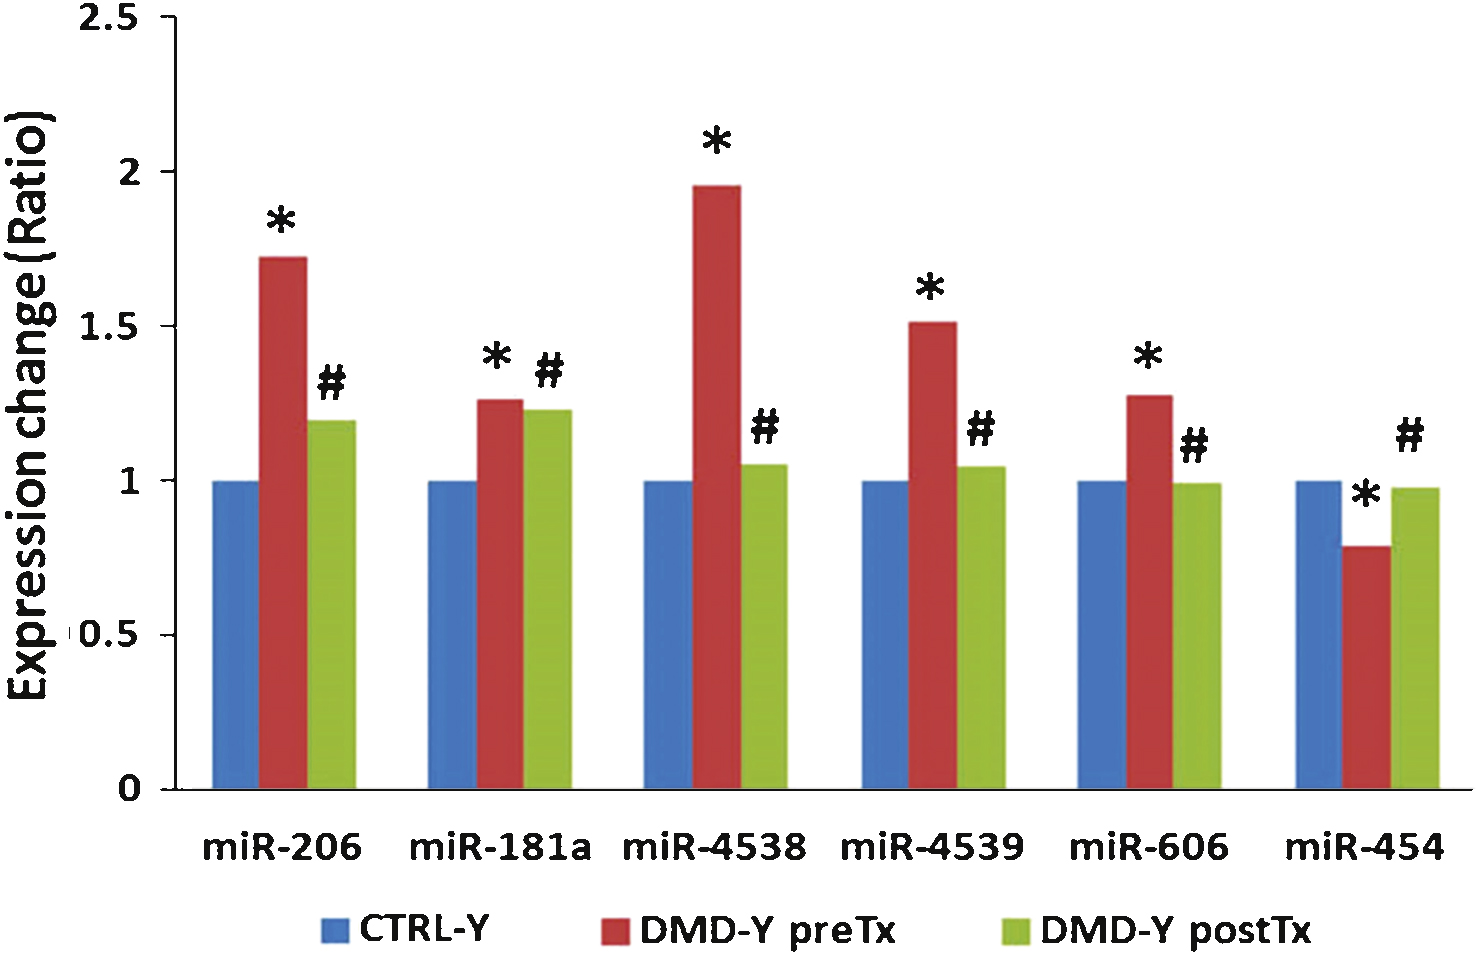 Steroid treatment reversed expression patterns of several miRNAs (miR-206, miR-181a, miR-4538, miR-4539, miR-606, and miR-454) that were altered in young DMD patients as compared to young healthy controls ( *P <  0.05 vs. CTRL-Y;  # P <  0.05 vs.DMD-YpreTx).